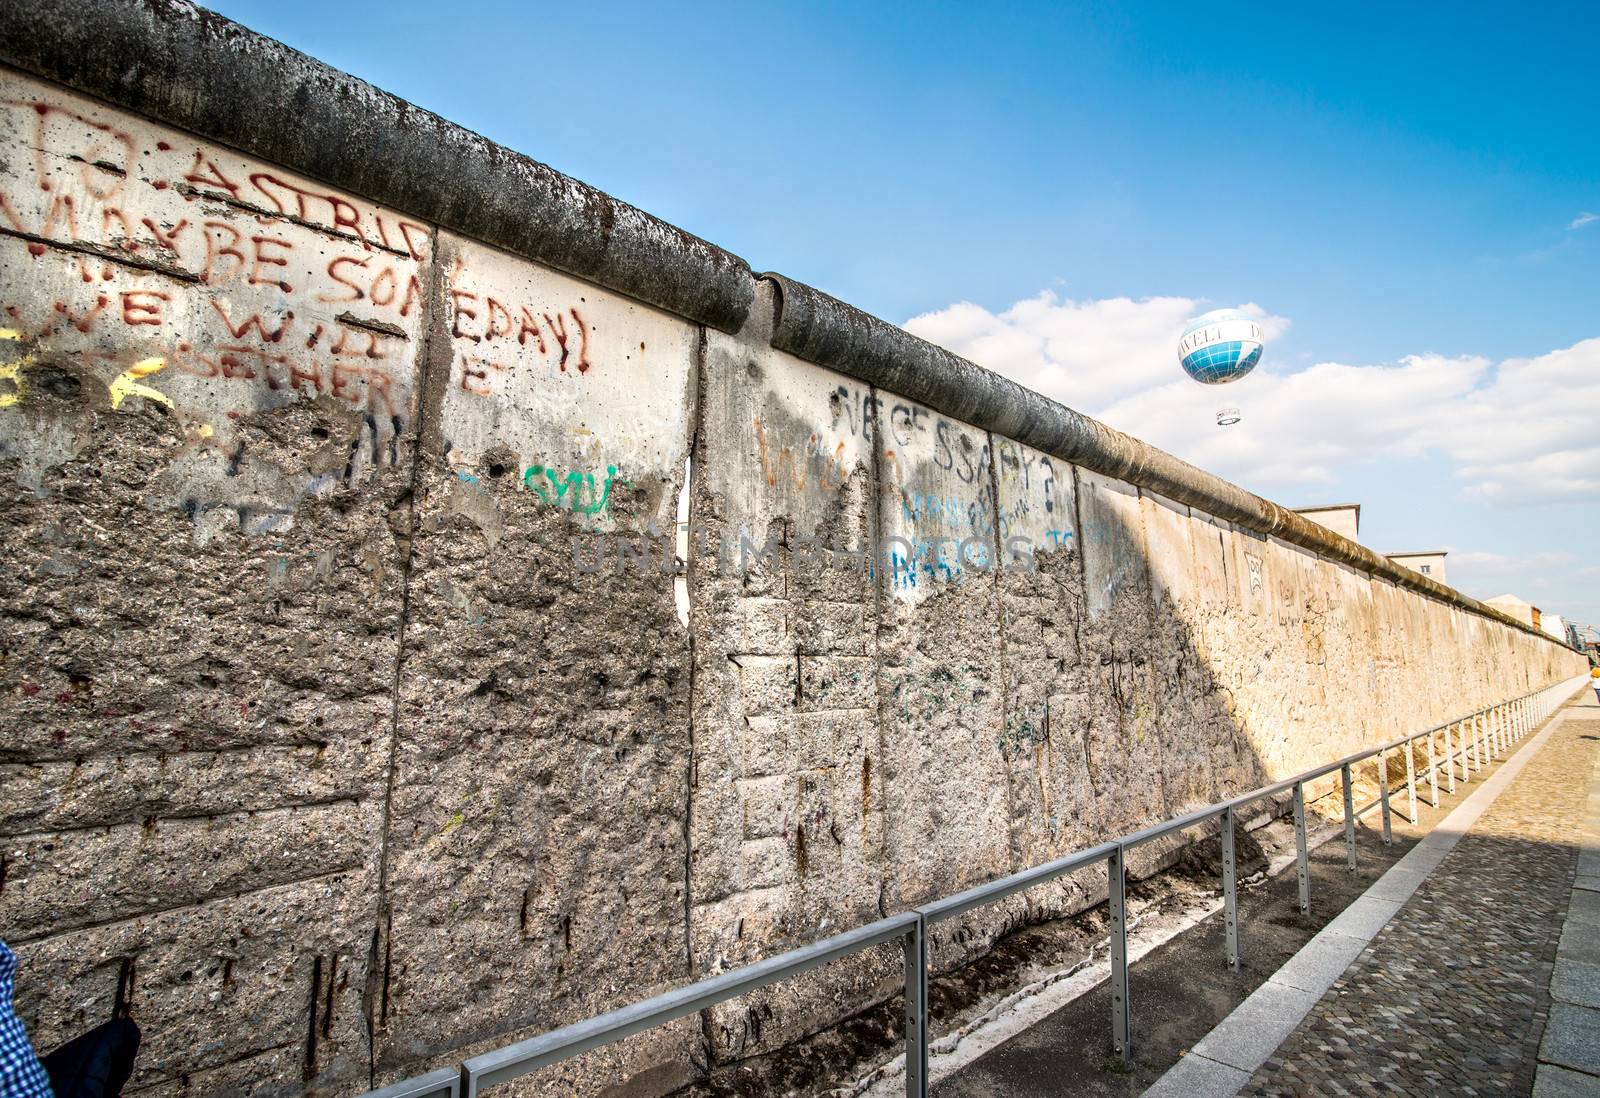 Remains of the Berlin Wall preserved along Bernauer Strasse.